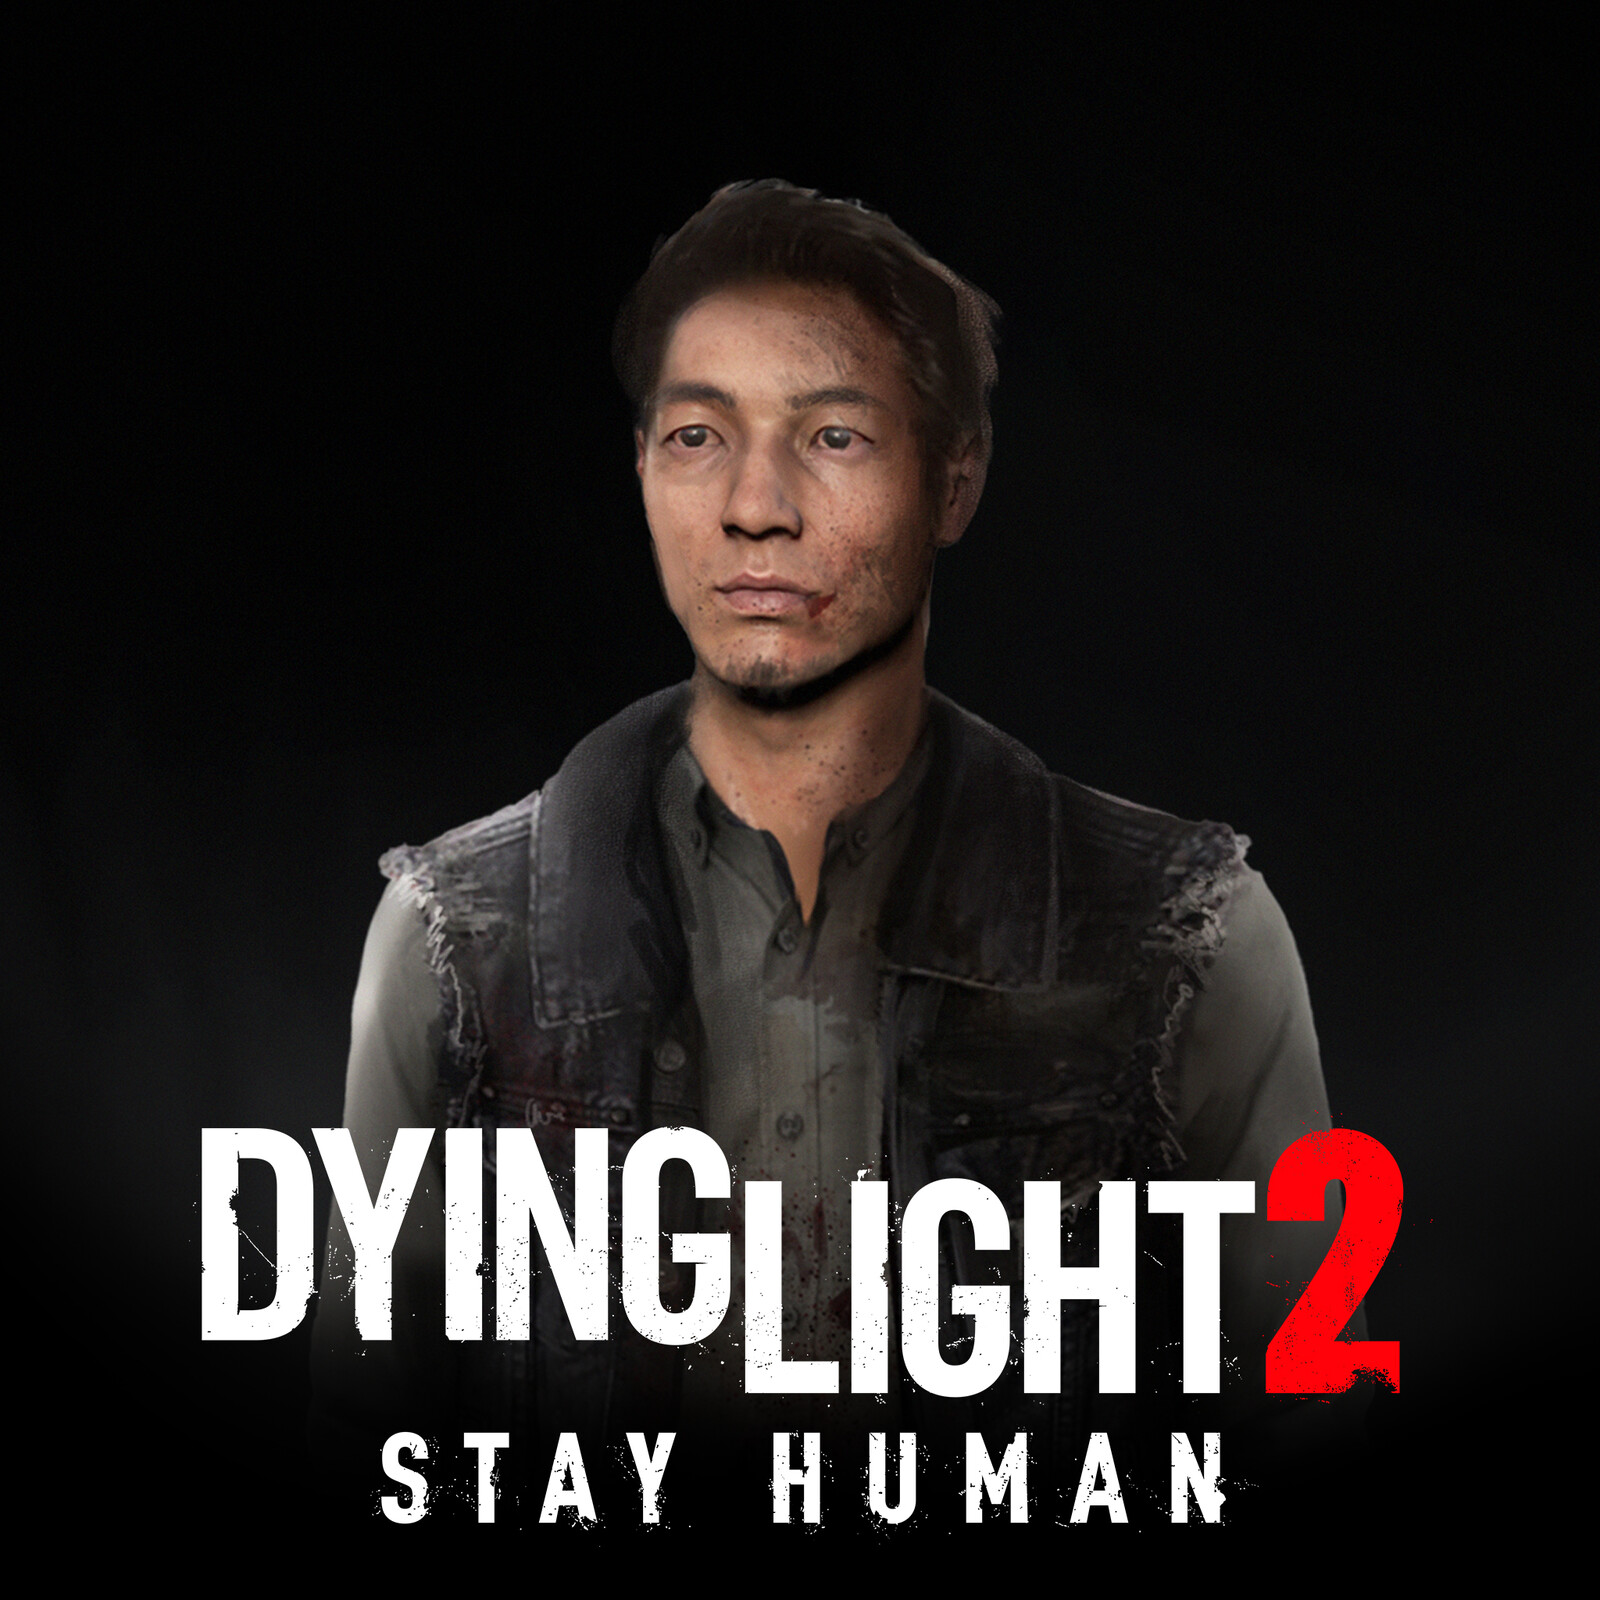 Dying Light 2 Stay Human - Dylan